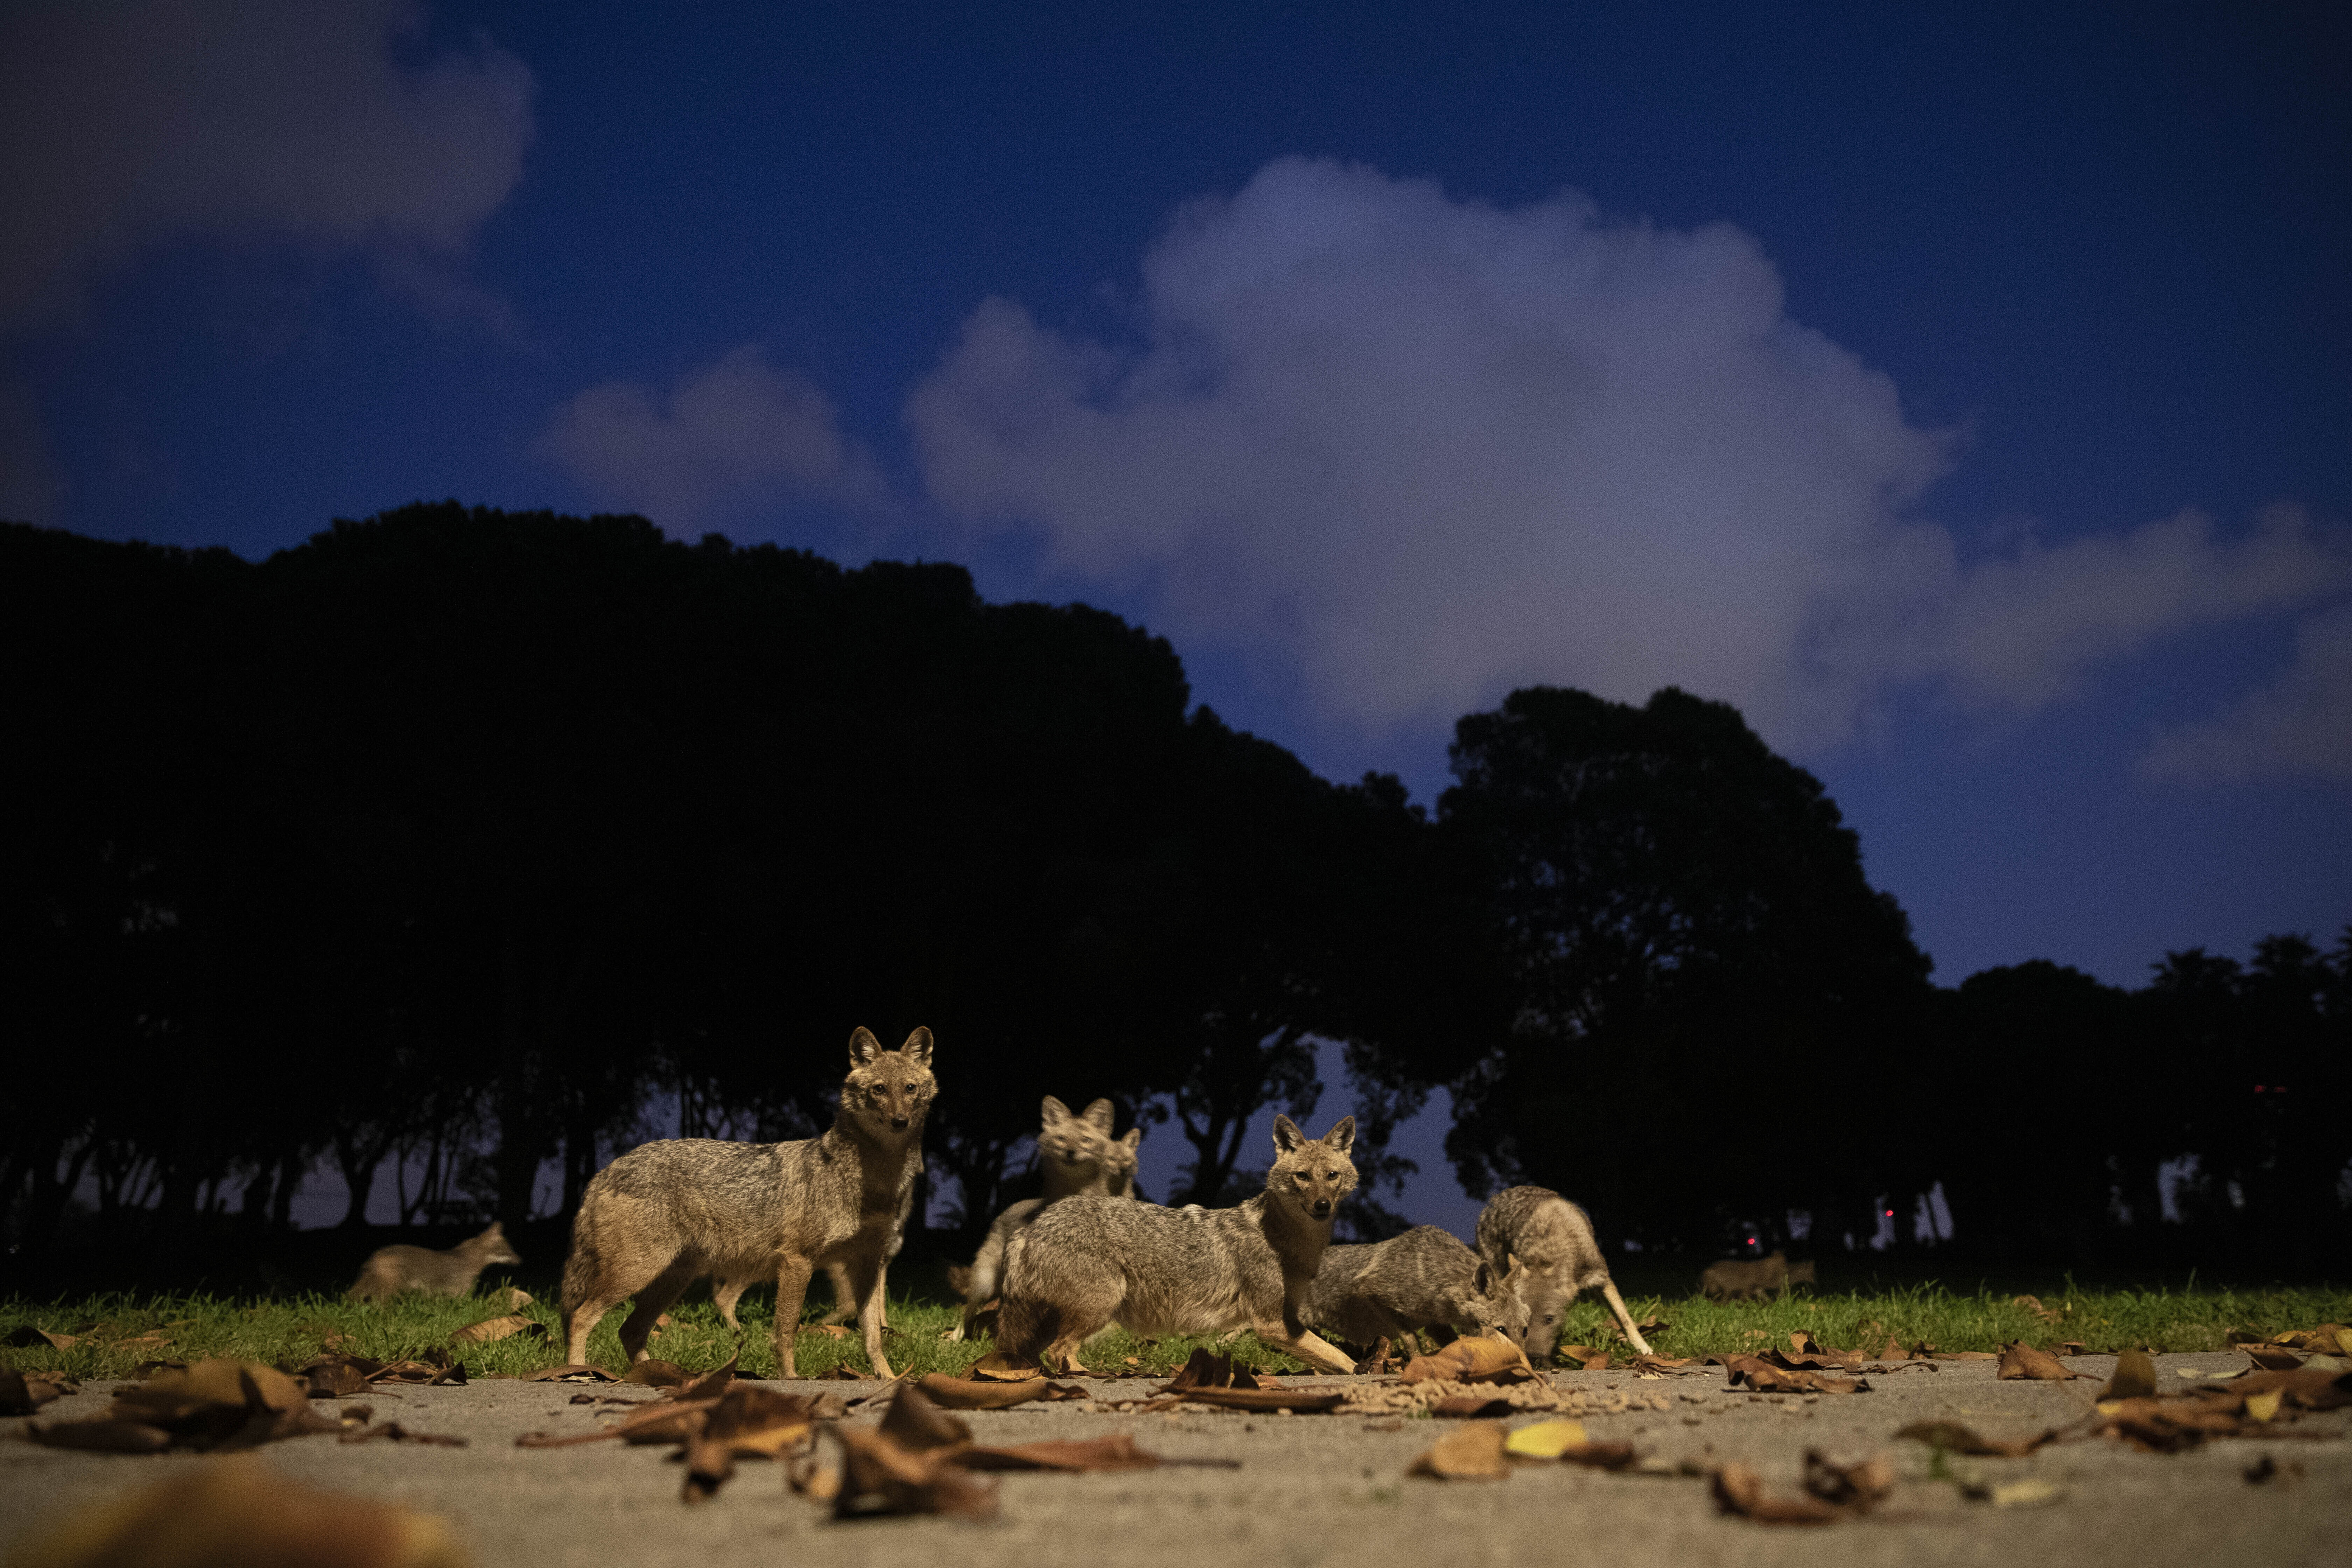 In this Saturday, April 11, 2020 file photo, a pack of jackals eats dog food that was left for them by a woman at Hayarkon Park in Tel Aviv, Israel. With a lockdown against the coronavirus crisis, the sprawling park is practically empty. This has cleared the way for packs of jackals to take over this urban oasis in the heart of the city as they search for food. File Photo: AP